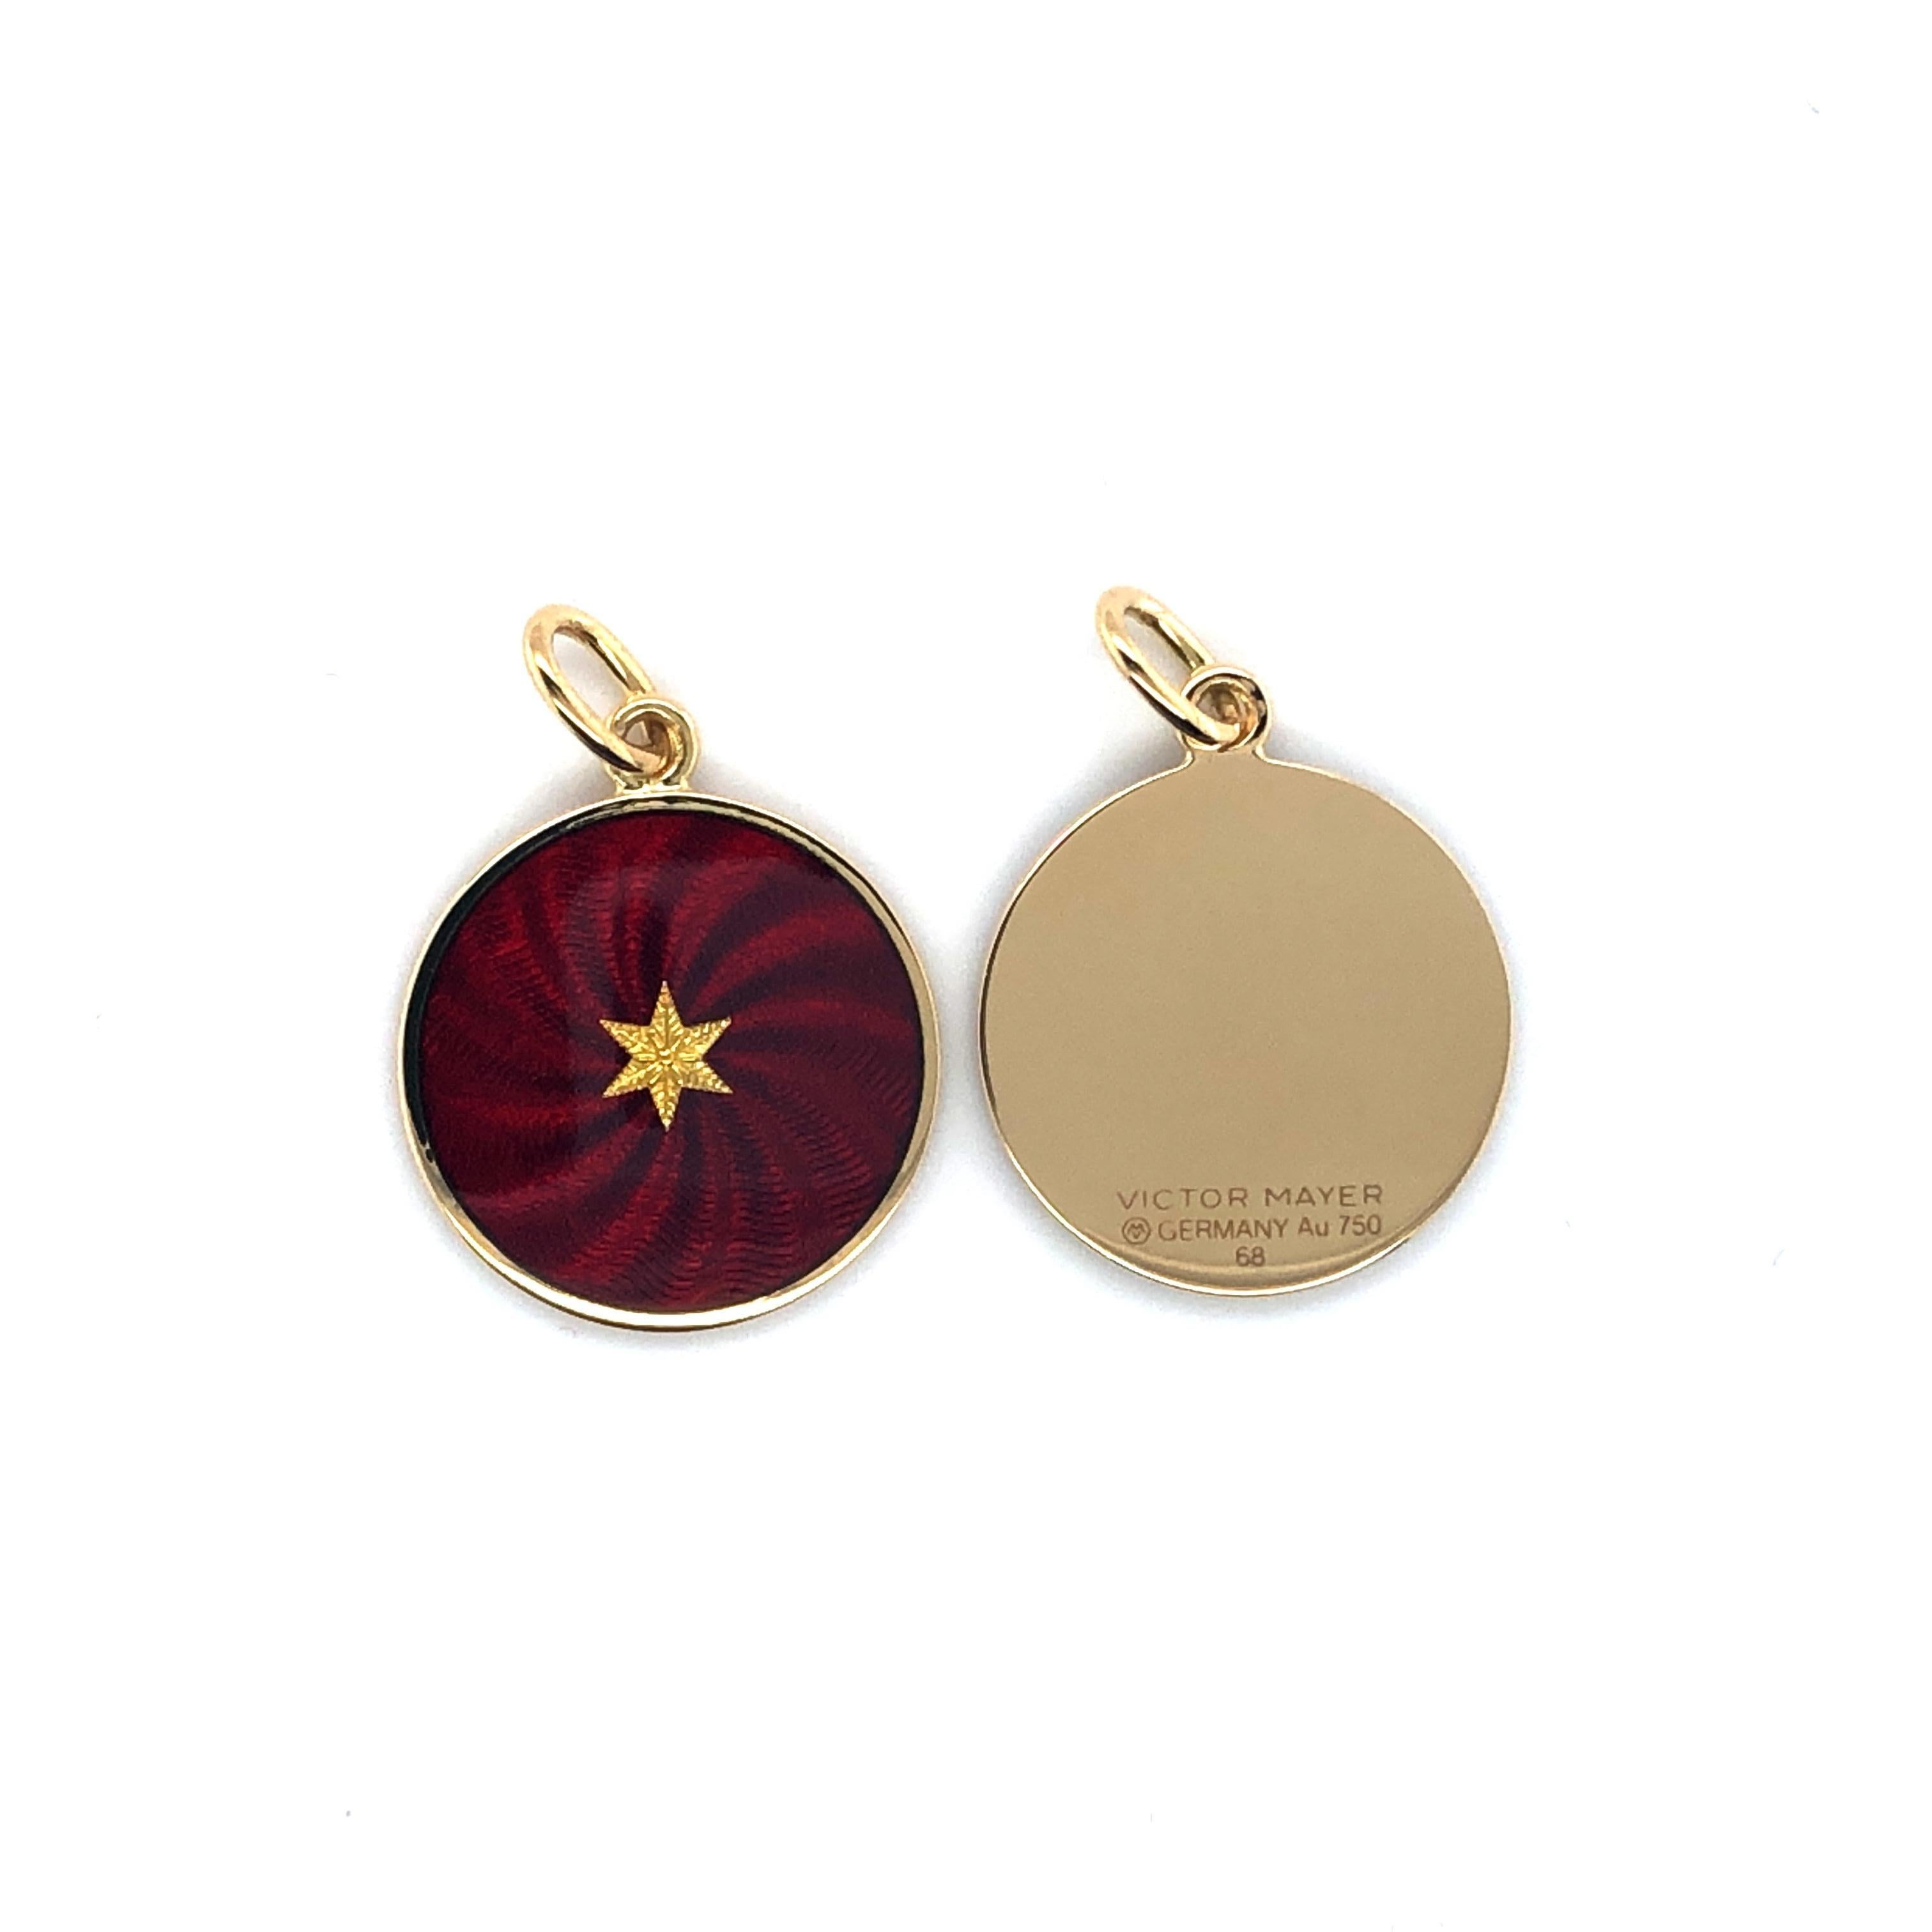 Victor Mayer disc pendant with star 18k yellow gold, Diskos collection, burgundy red vitreous enamel with star paillon, diameter app. 15.0 mm

About the creator Victor Mayer
Victor Mayer is internationally renowned for elegant timeless designs and